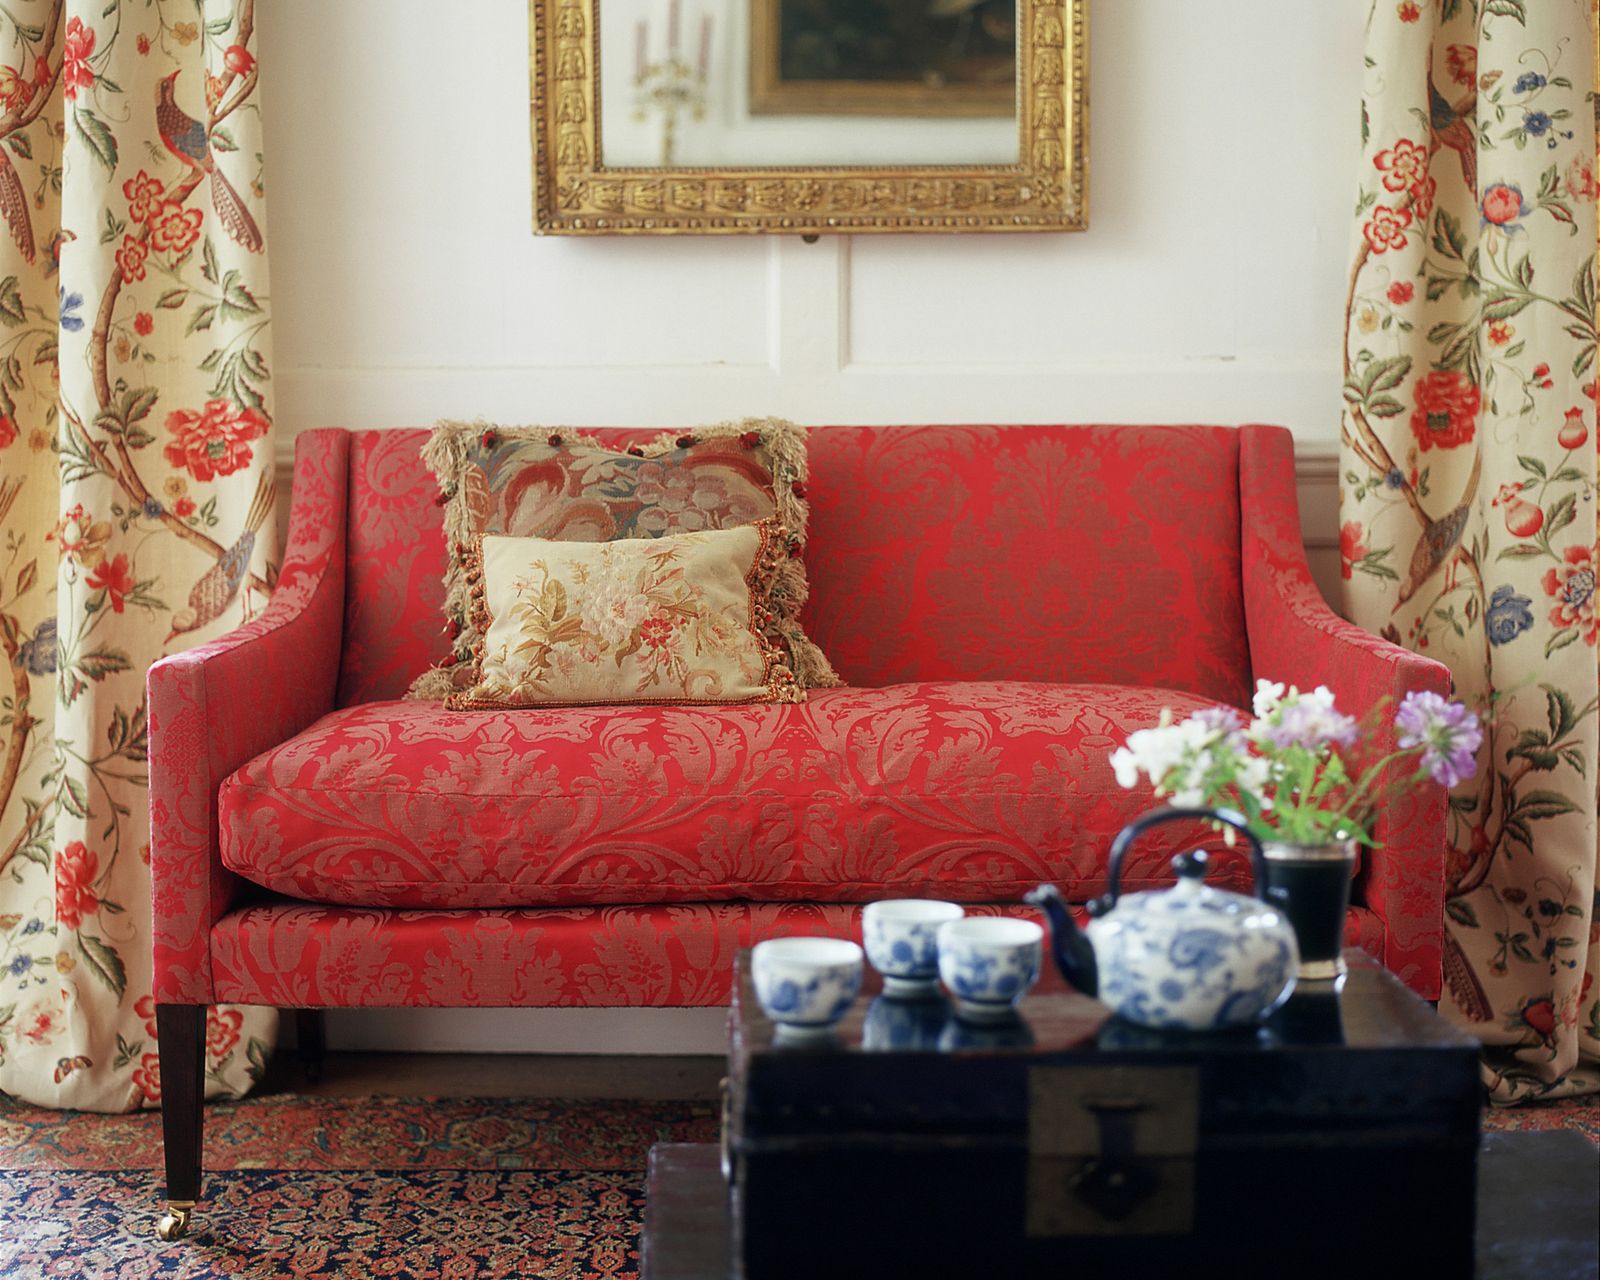 The Crown interiors: how to get the look | Homes & Gardens